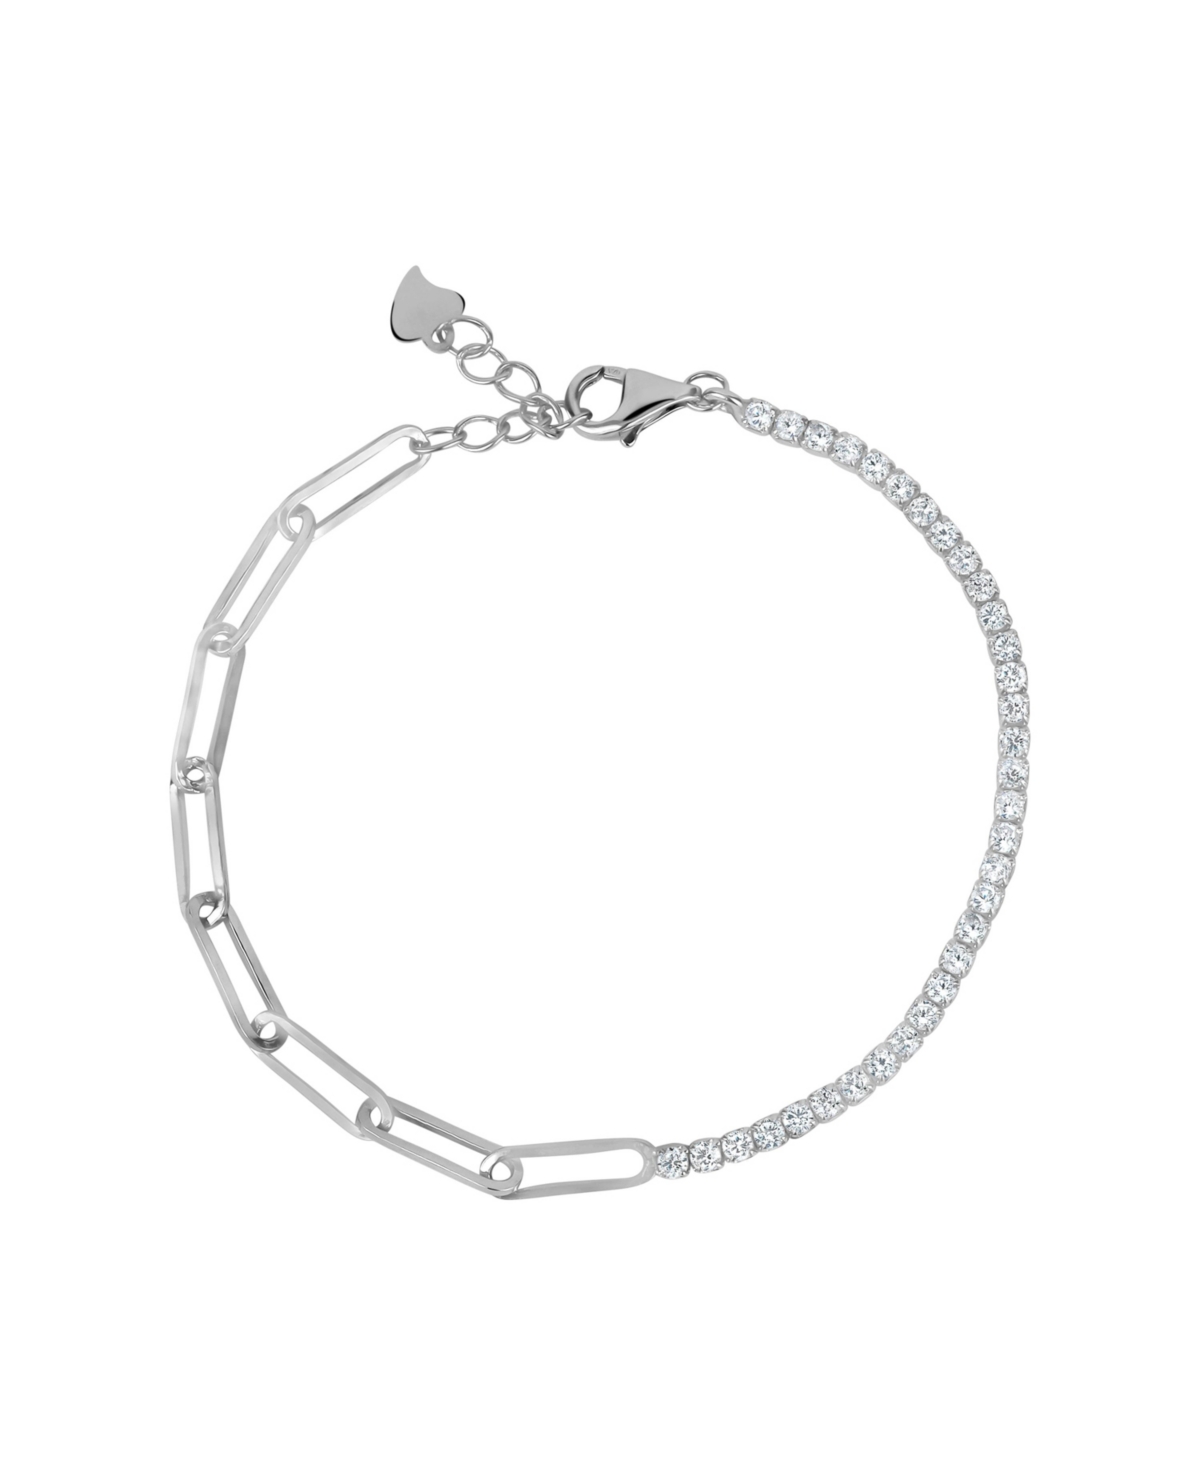 3A Cubic Zirconia Bracelet with Large Links - Silver